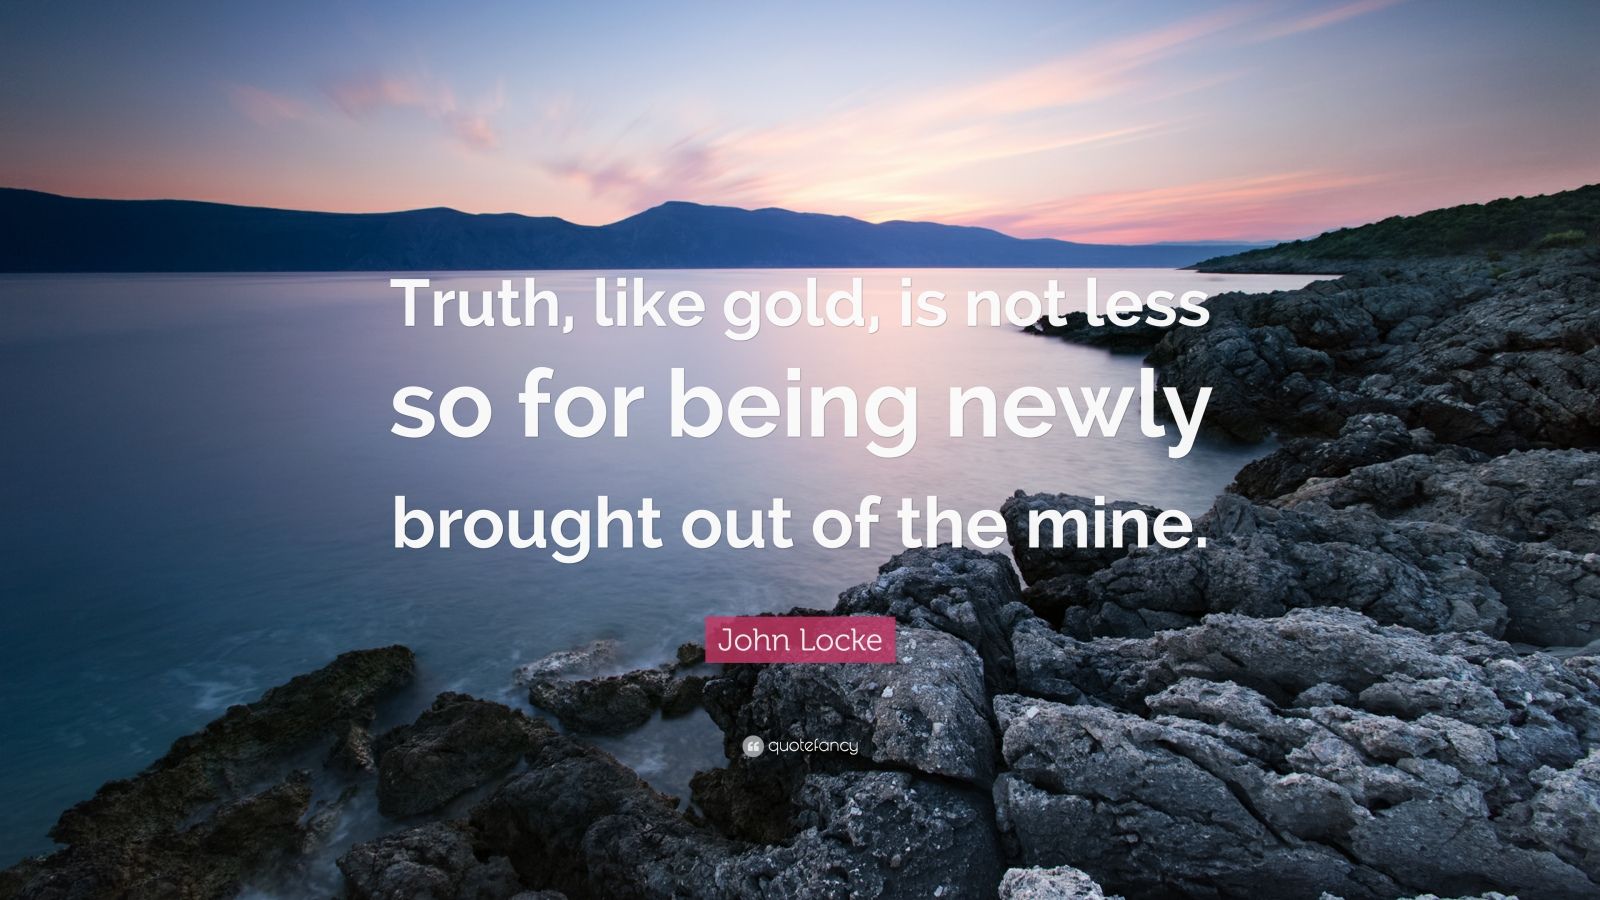 John Locke Quote “truth Like Gold Is Not Less So For Being Newly Brought Out Of The Mine 